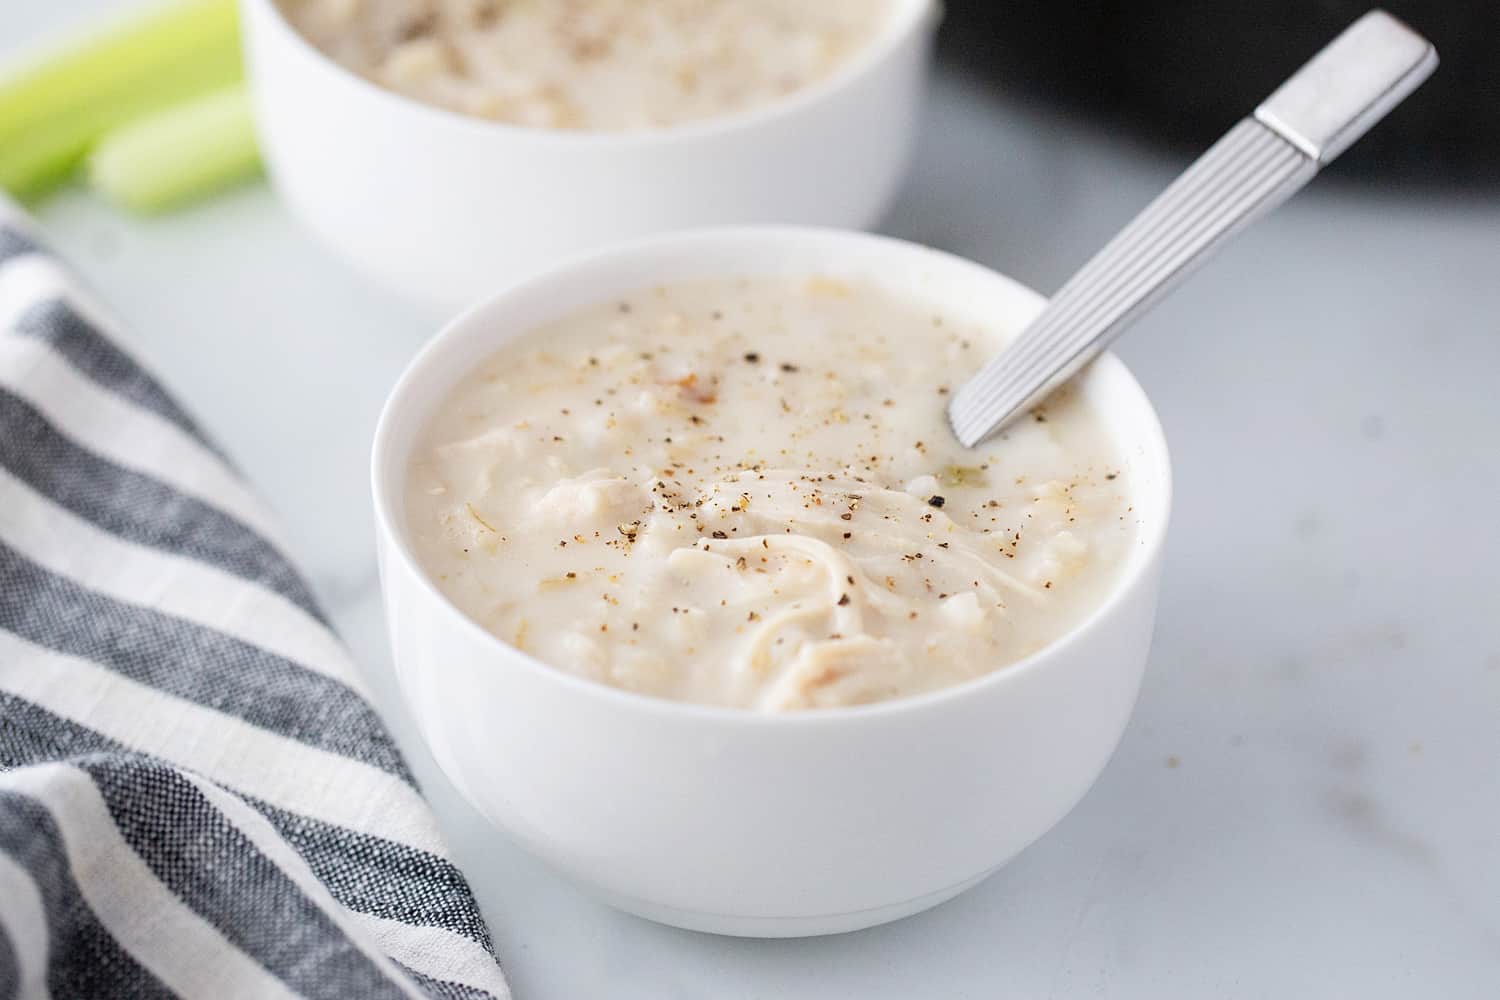 Creamy Chicken and Rice Soup - Creamy chicken and rice soup is a hearty meal with simple ingredients like brown rice, celery, onion, and chicken. Total family favorite!